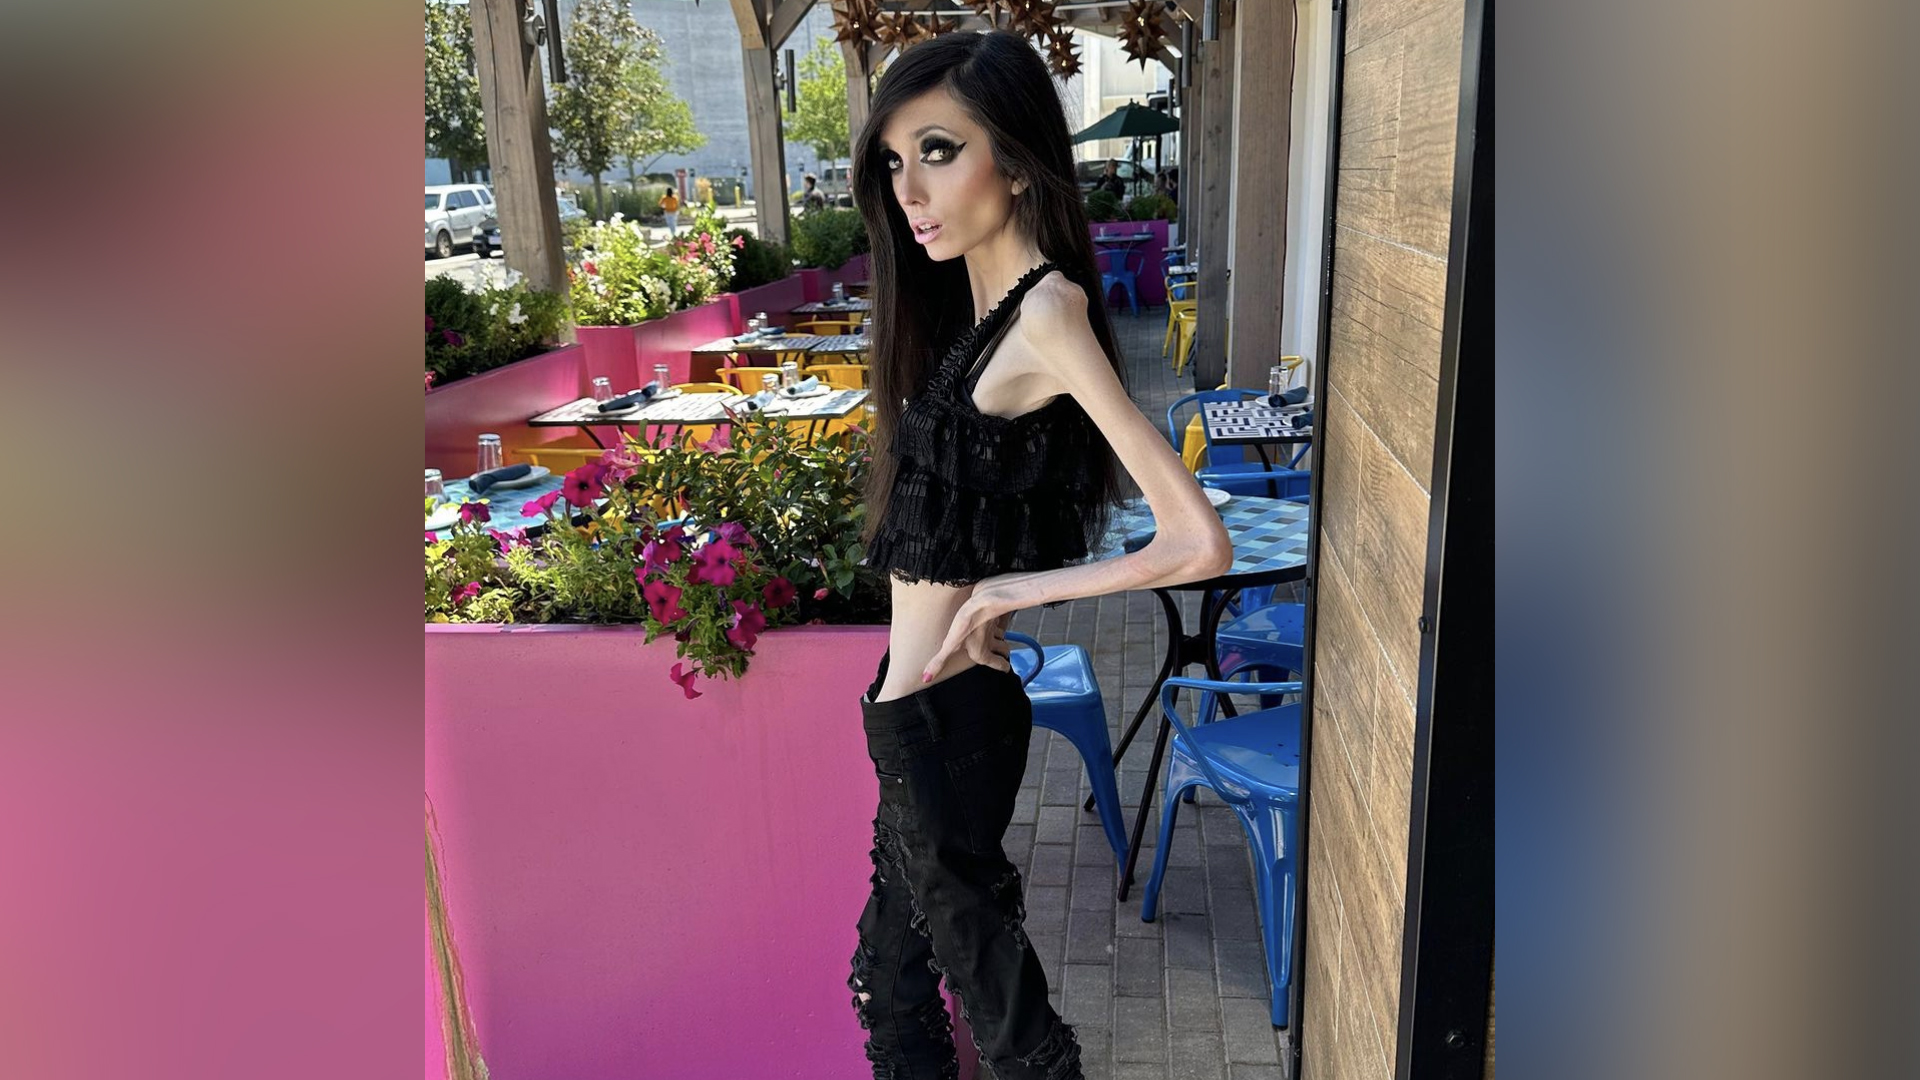 Cops Flooded With Calls Over YouTuber Eugenia Cooney’s Appearance